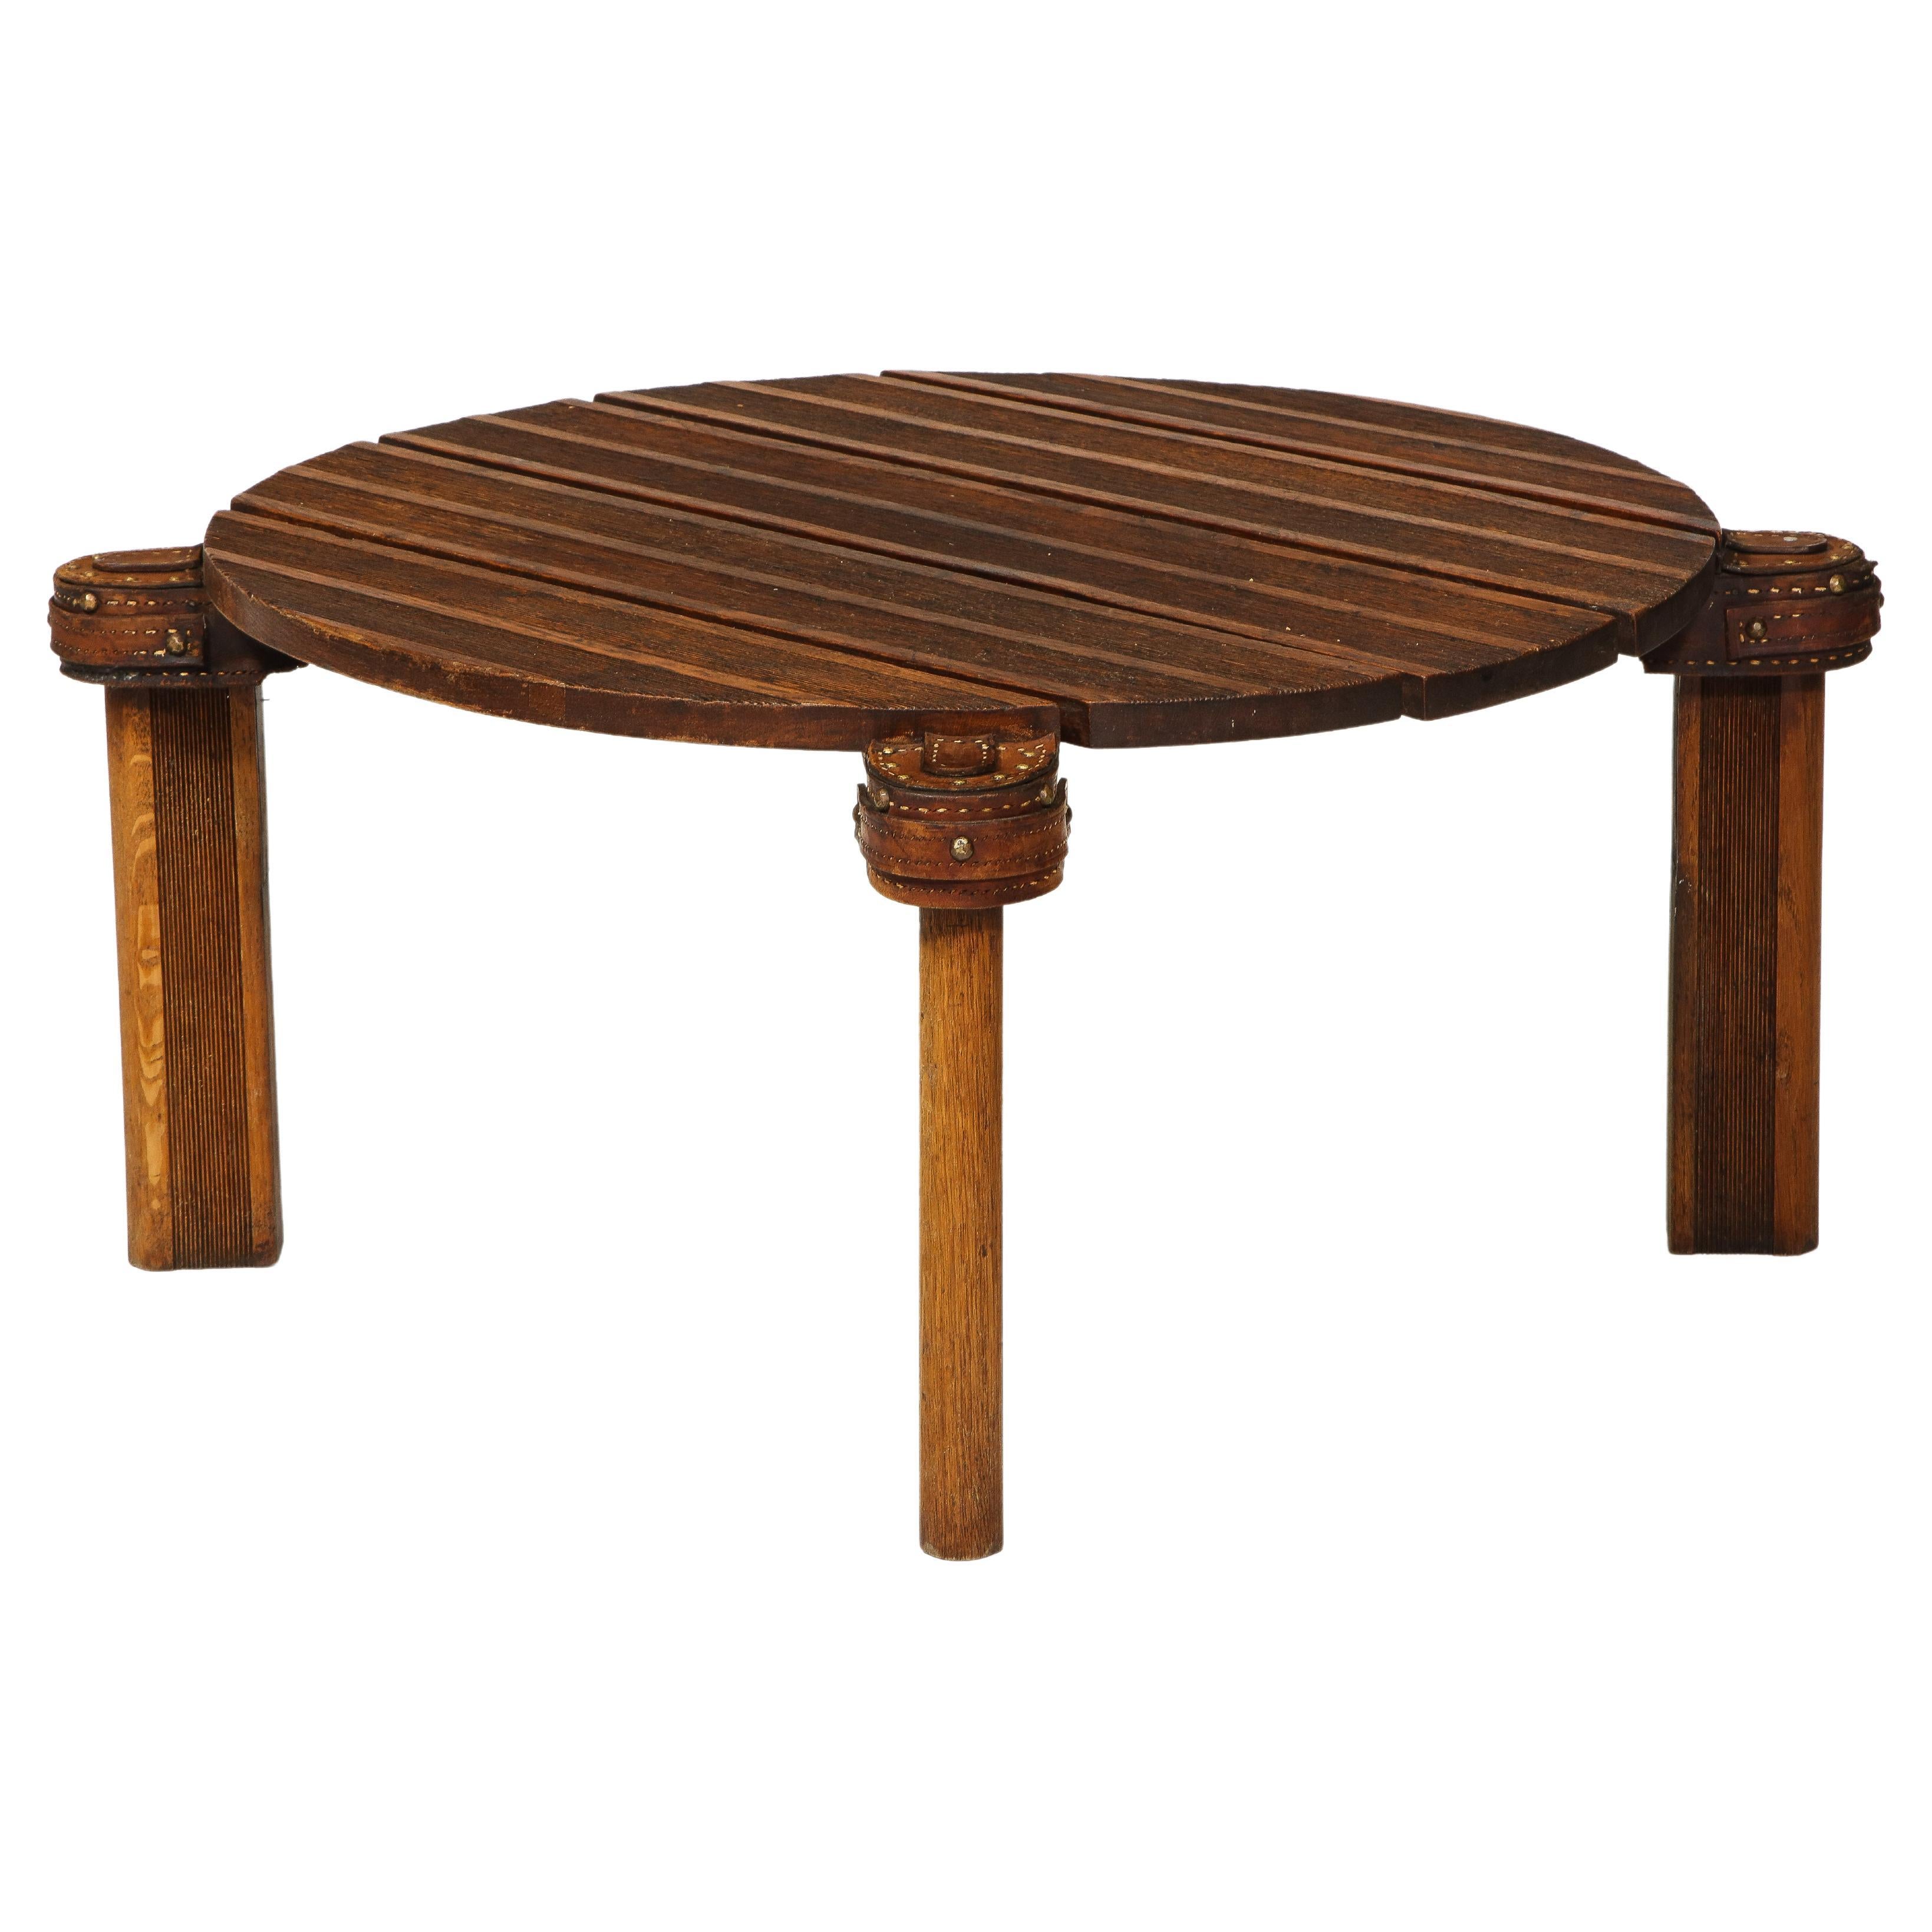 Round Oak and Leather Coffee Table by Jacques Adnet, France, c. Mid-20th Century For Sale